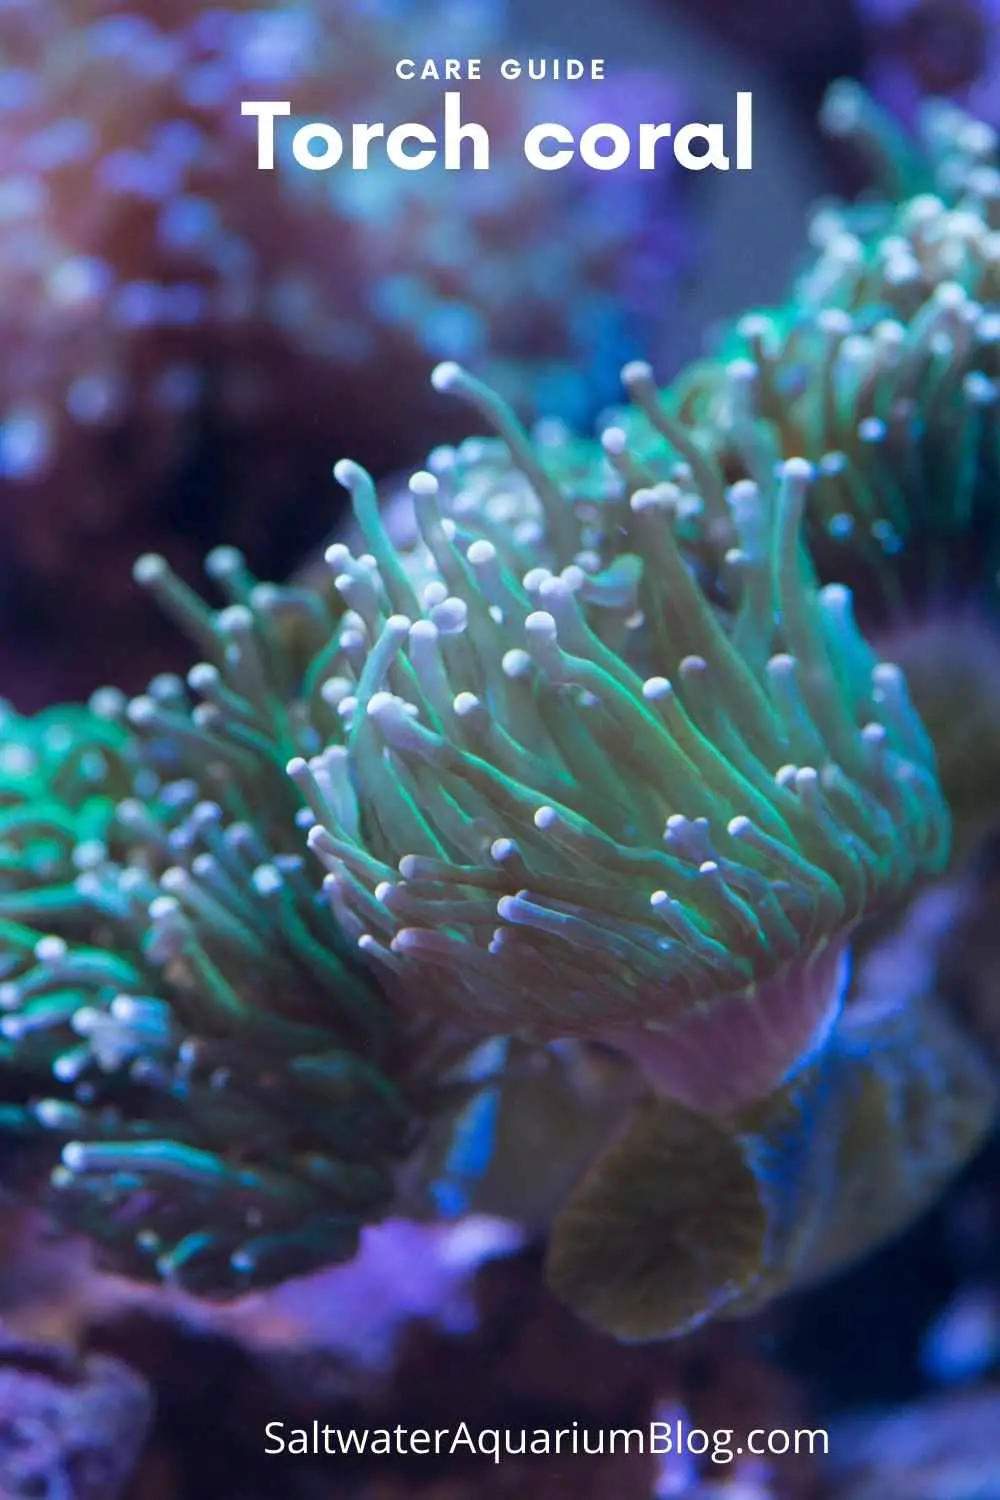 Torch coral care guide